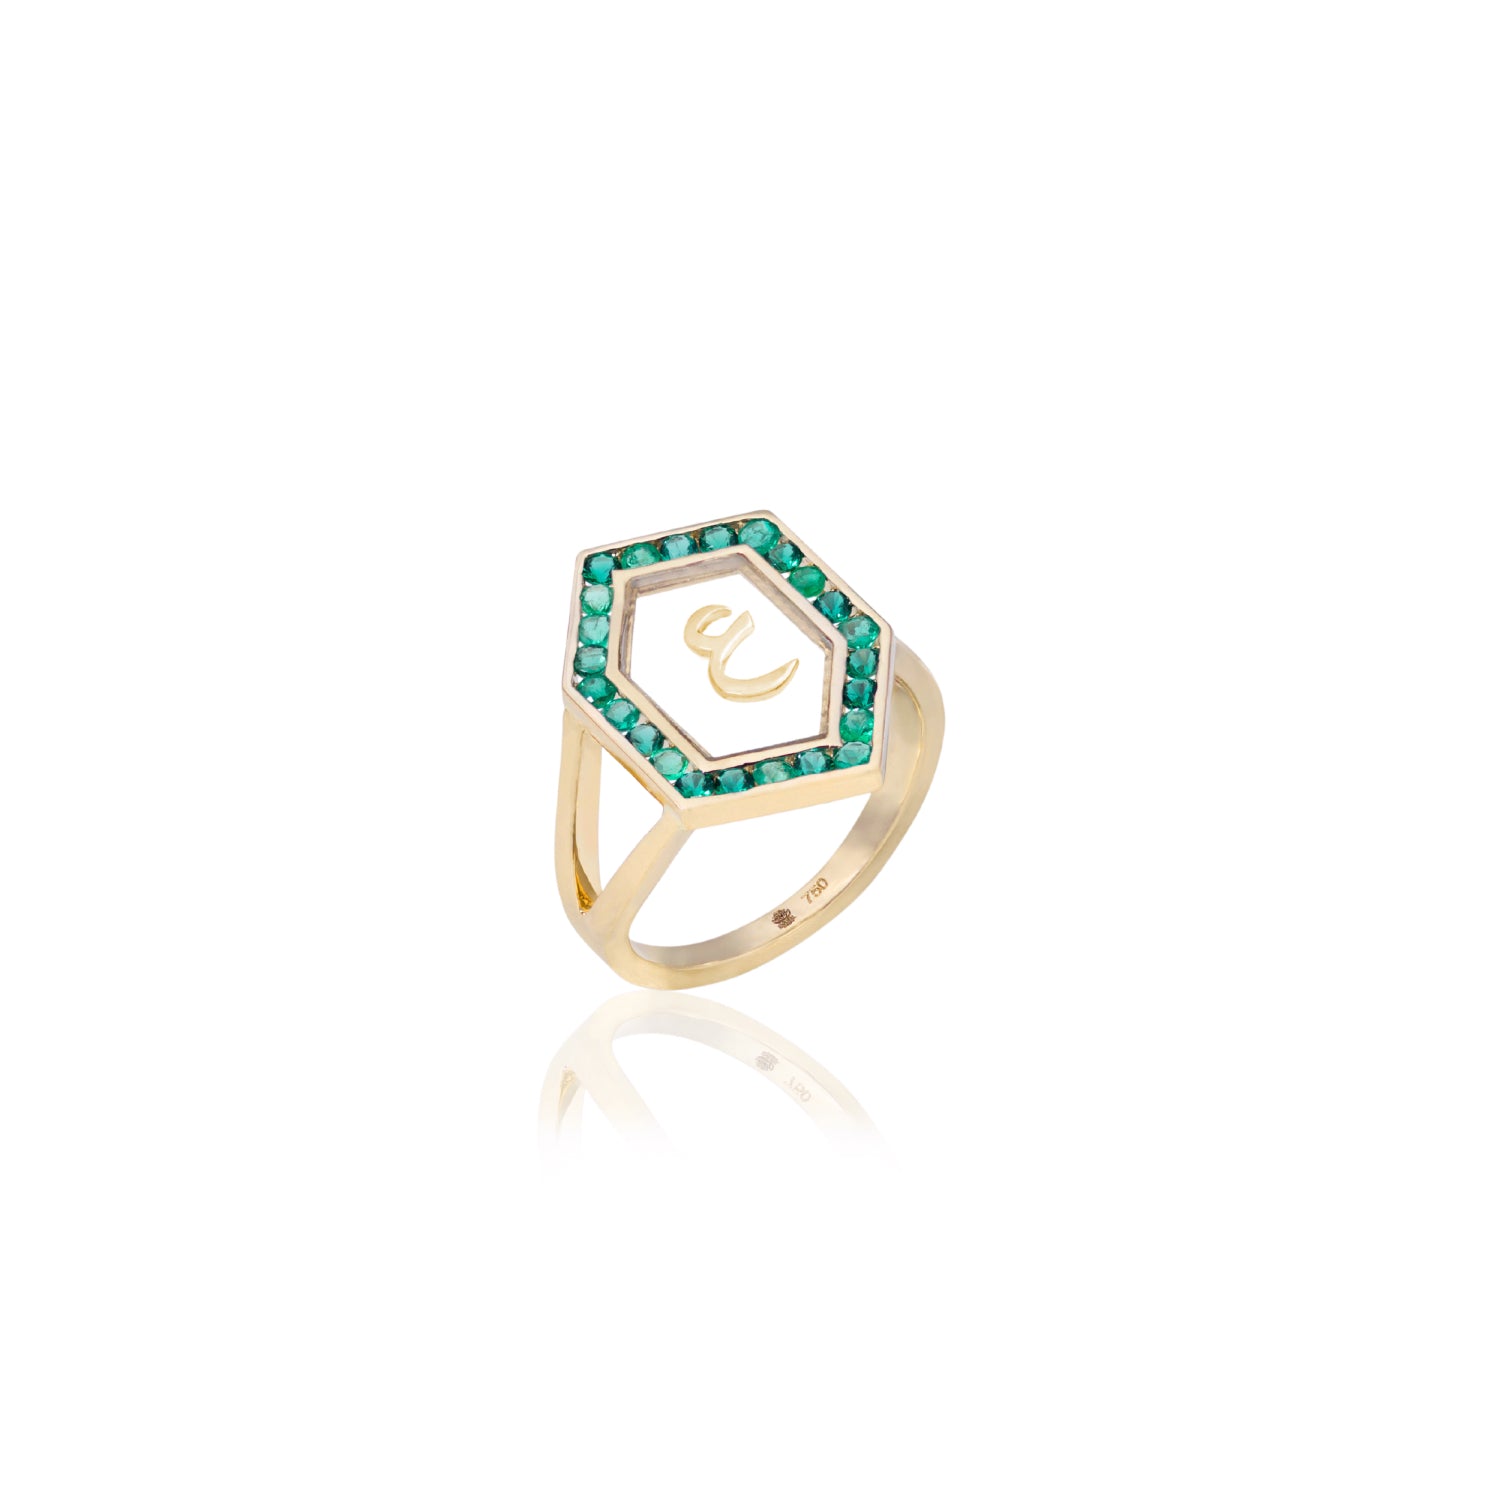 Qamoos 1.0 Letter ع Emerald Ring in Yellow Gold